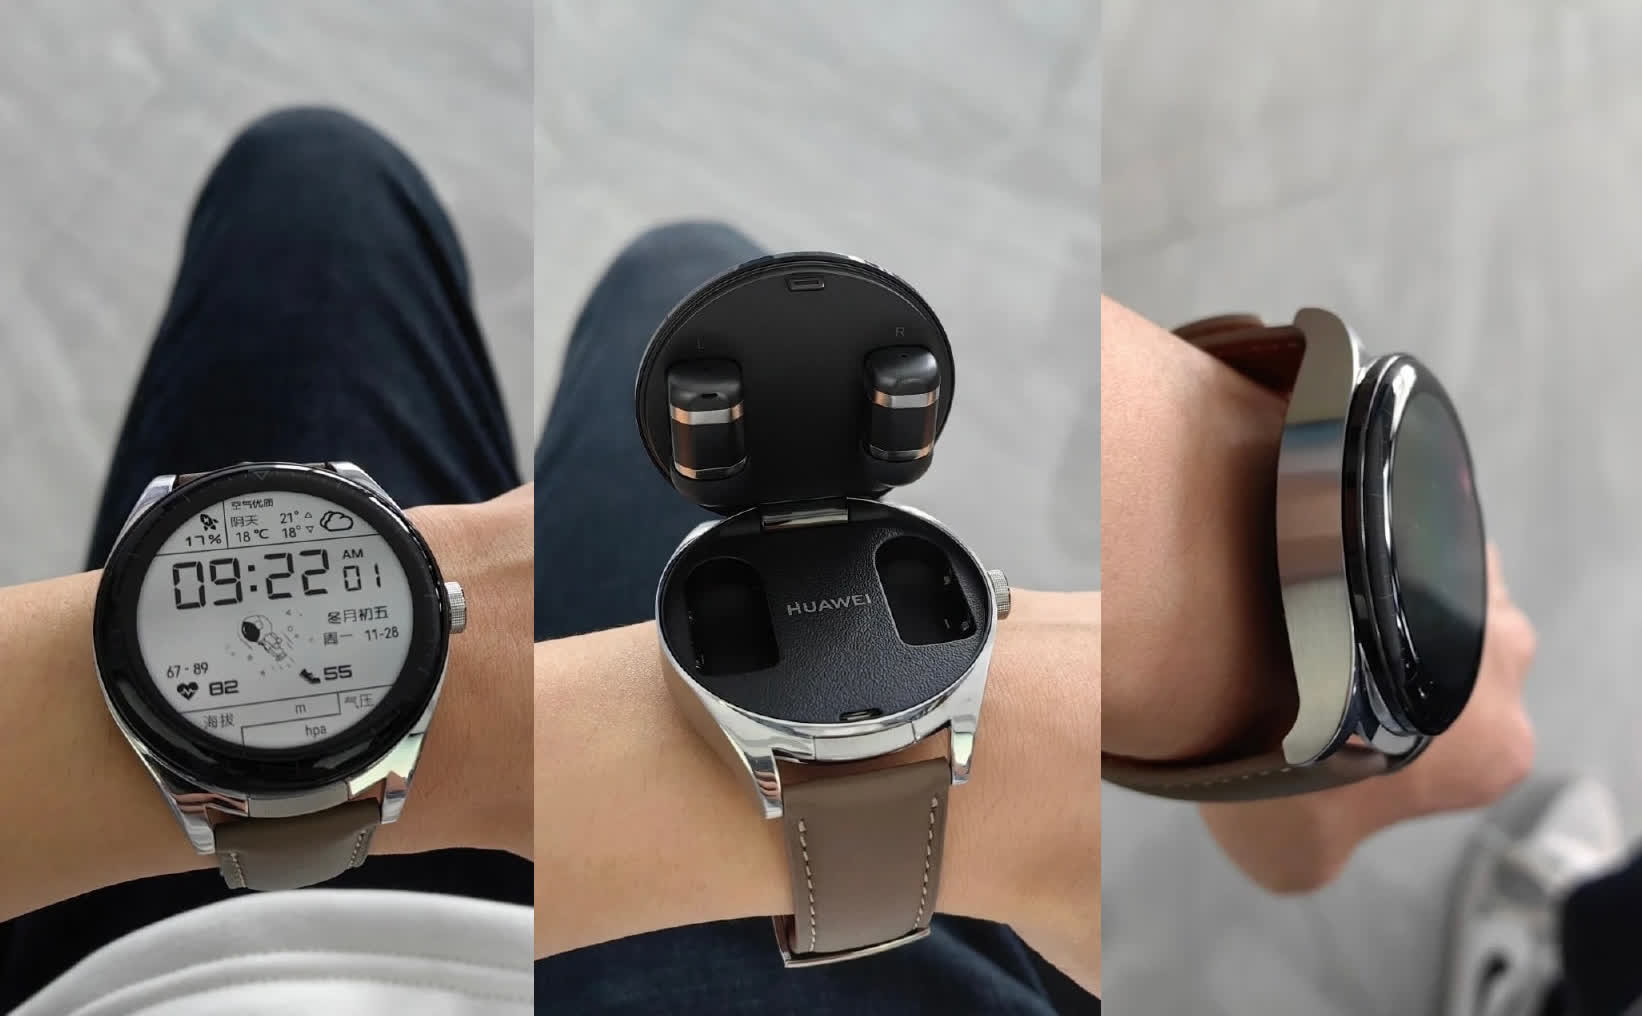 Huawei's latest smartwatch has a storage compartment for wireless earbuds